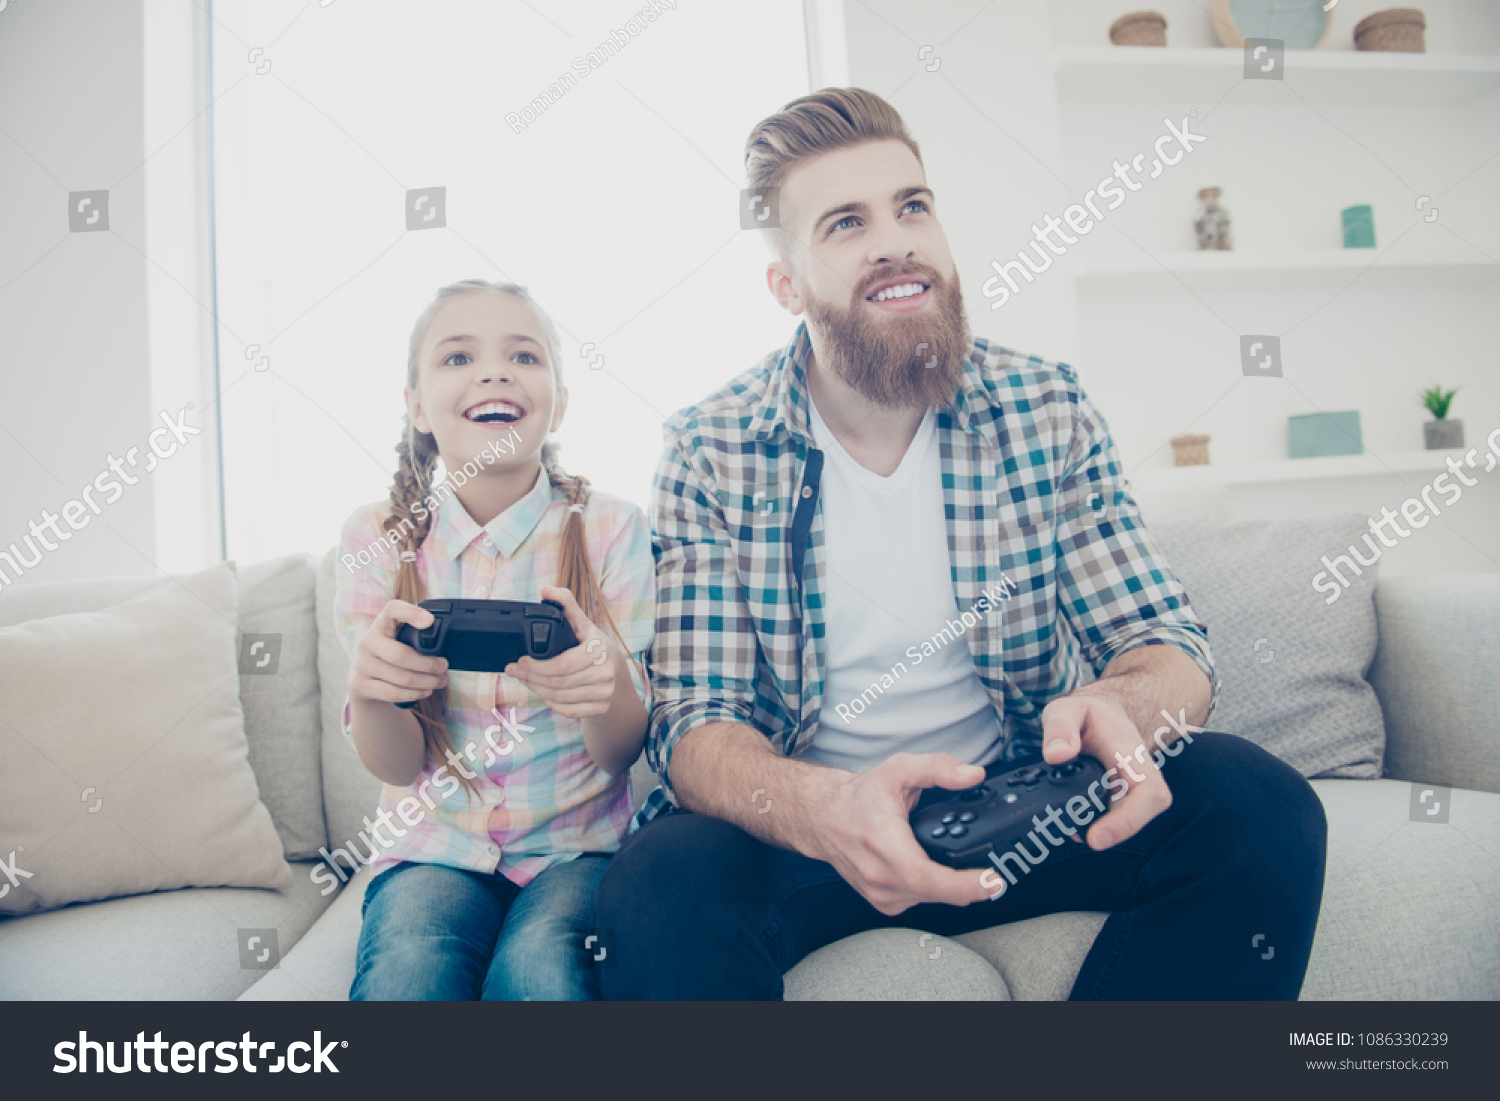 Cheerful joyful excited stylish trendy father and daughter holding joy-sticks in hands playing video game sitting on couch indoor in living room enjoying free time wearing casual outfit front view #1086330239